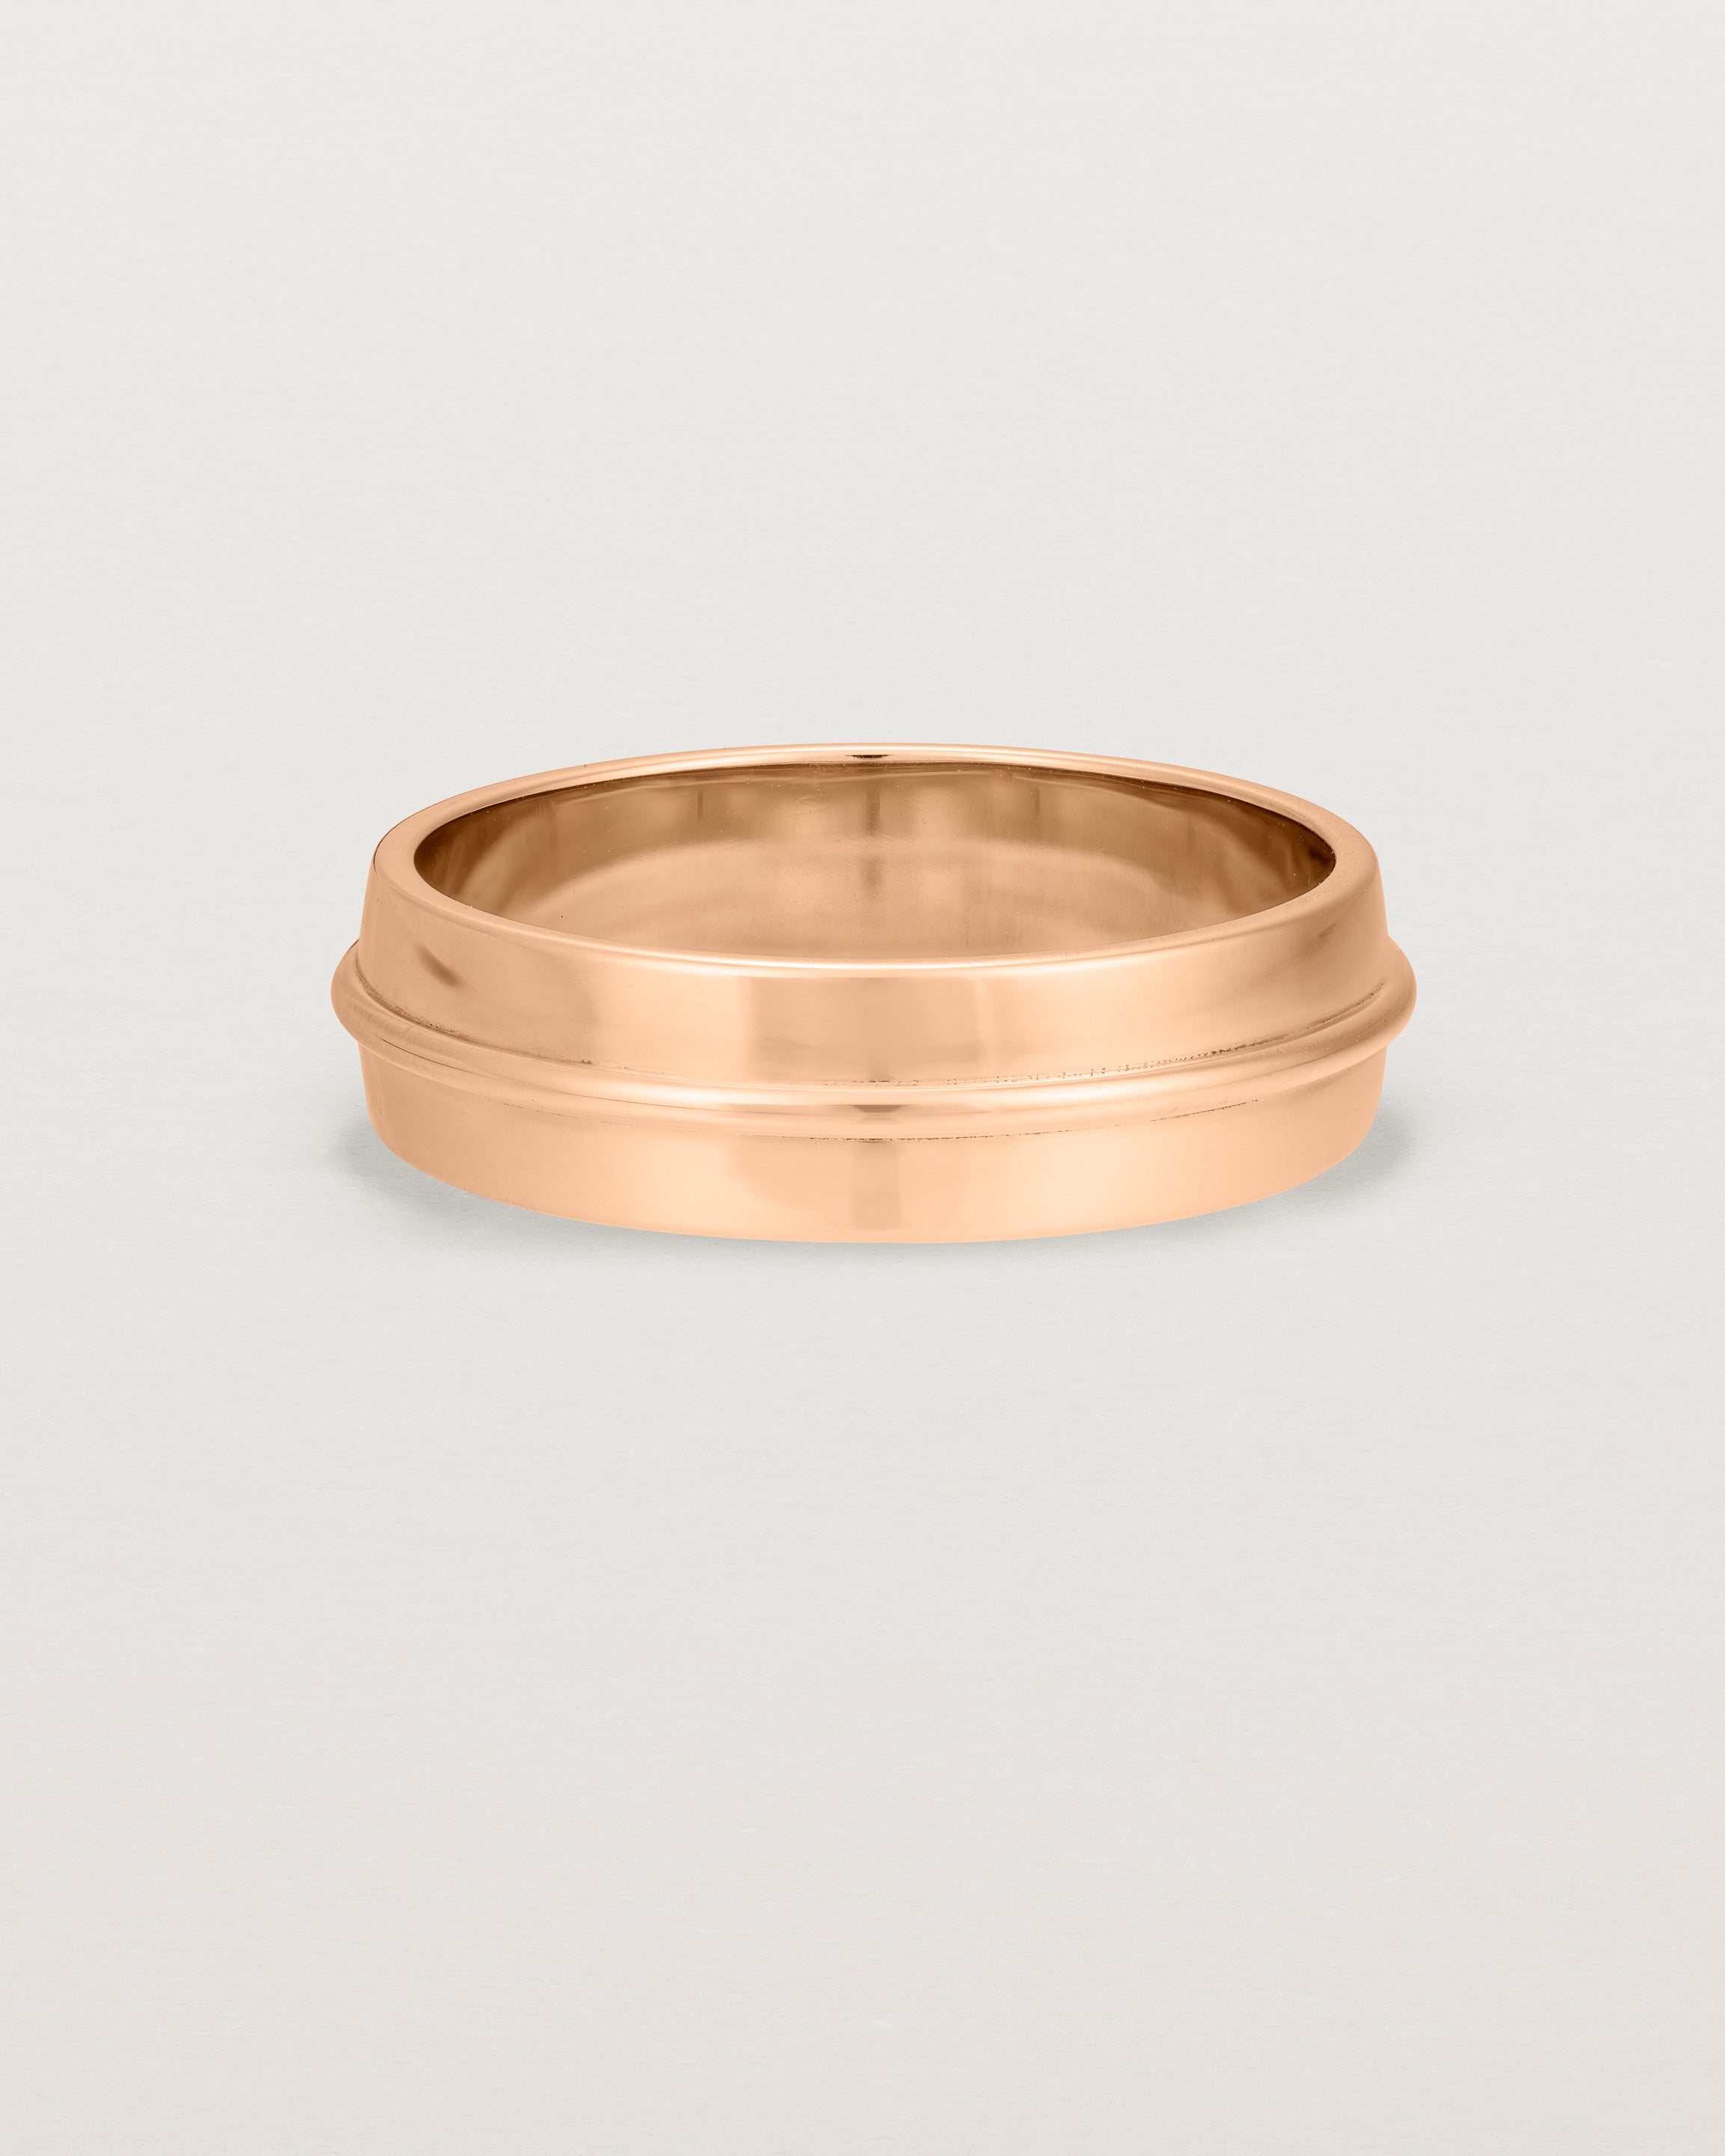 Front view of the Seam Wedding Ring | 6mm | Rose Gold.